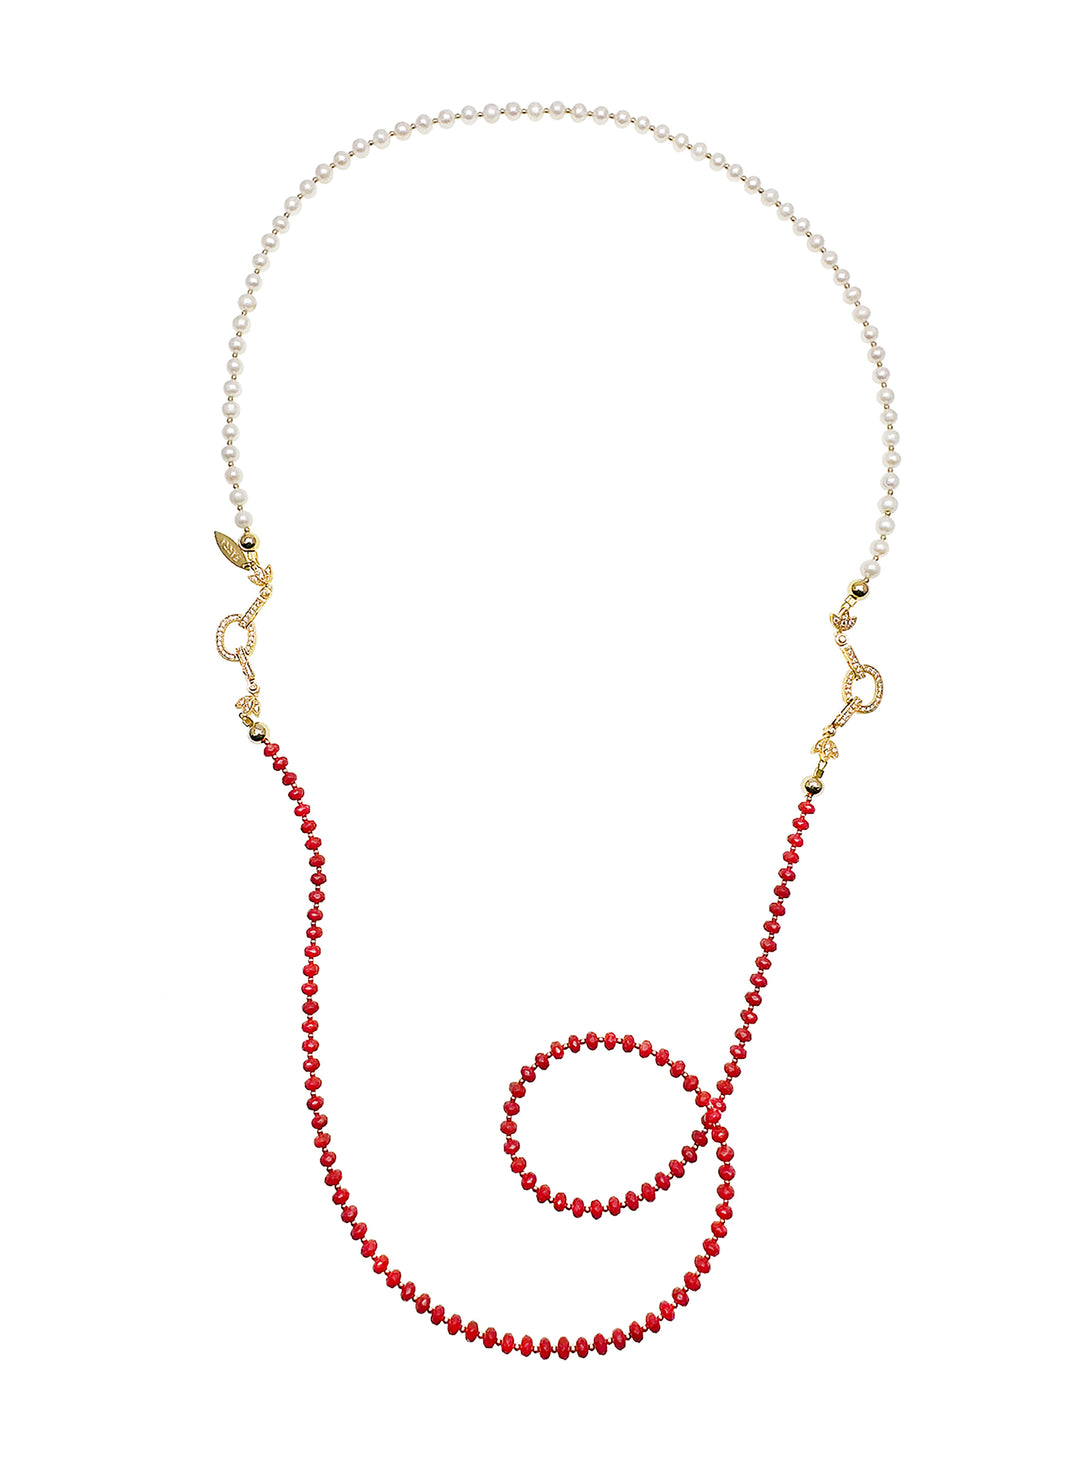 Versatile Red Coral and Pearls Multi-Wear Necklace JN003 - FARRA